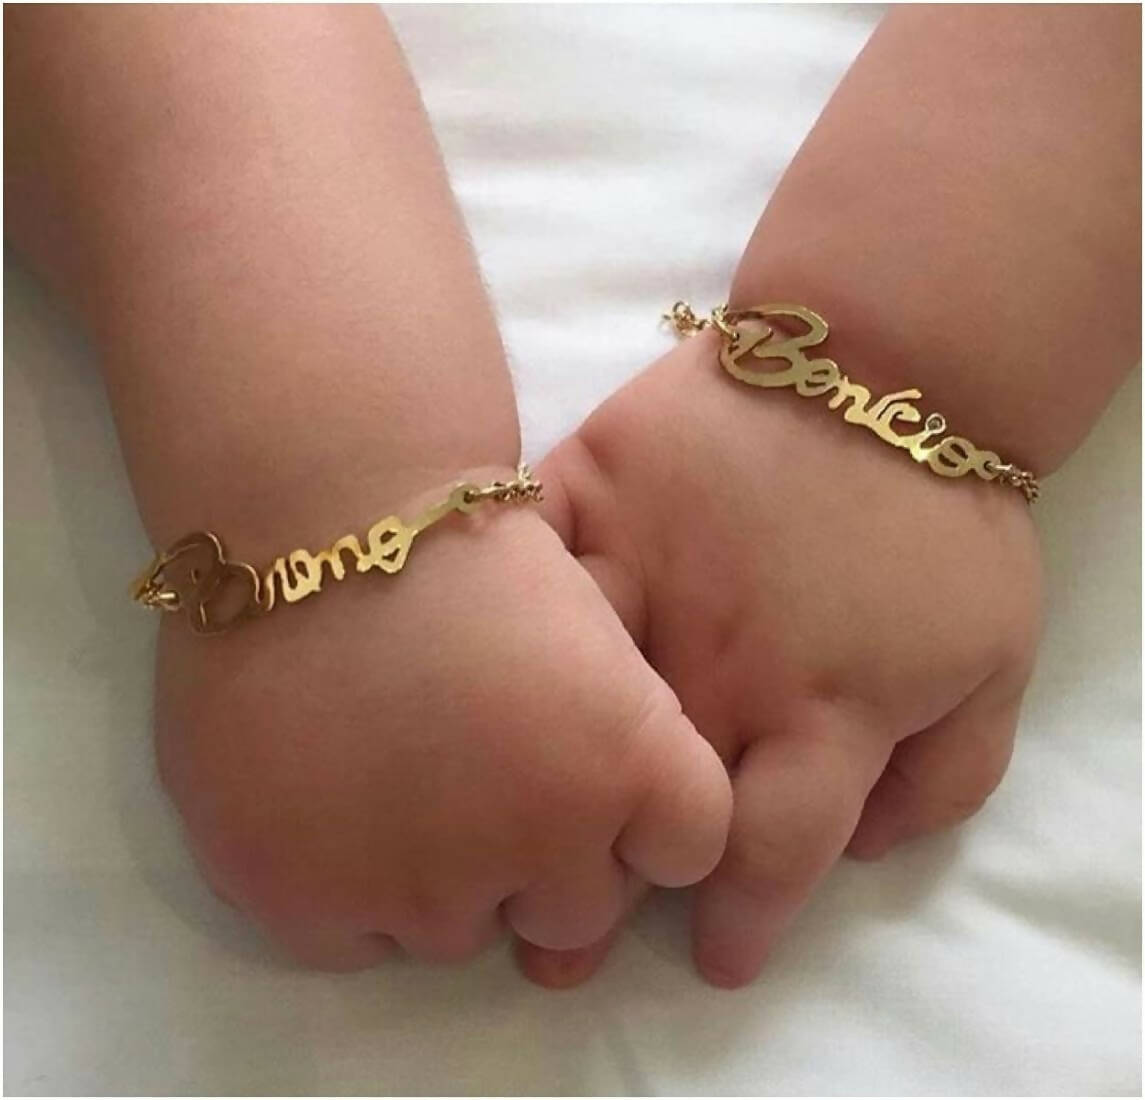 Customize Baby bracelet with name engraved